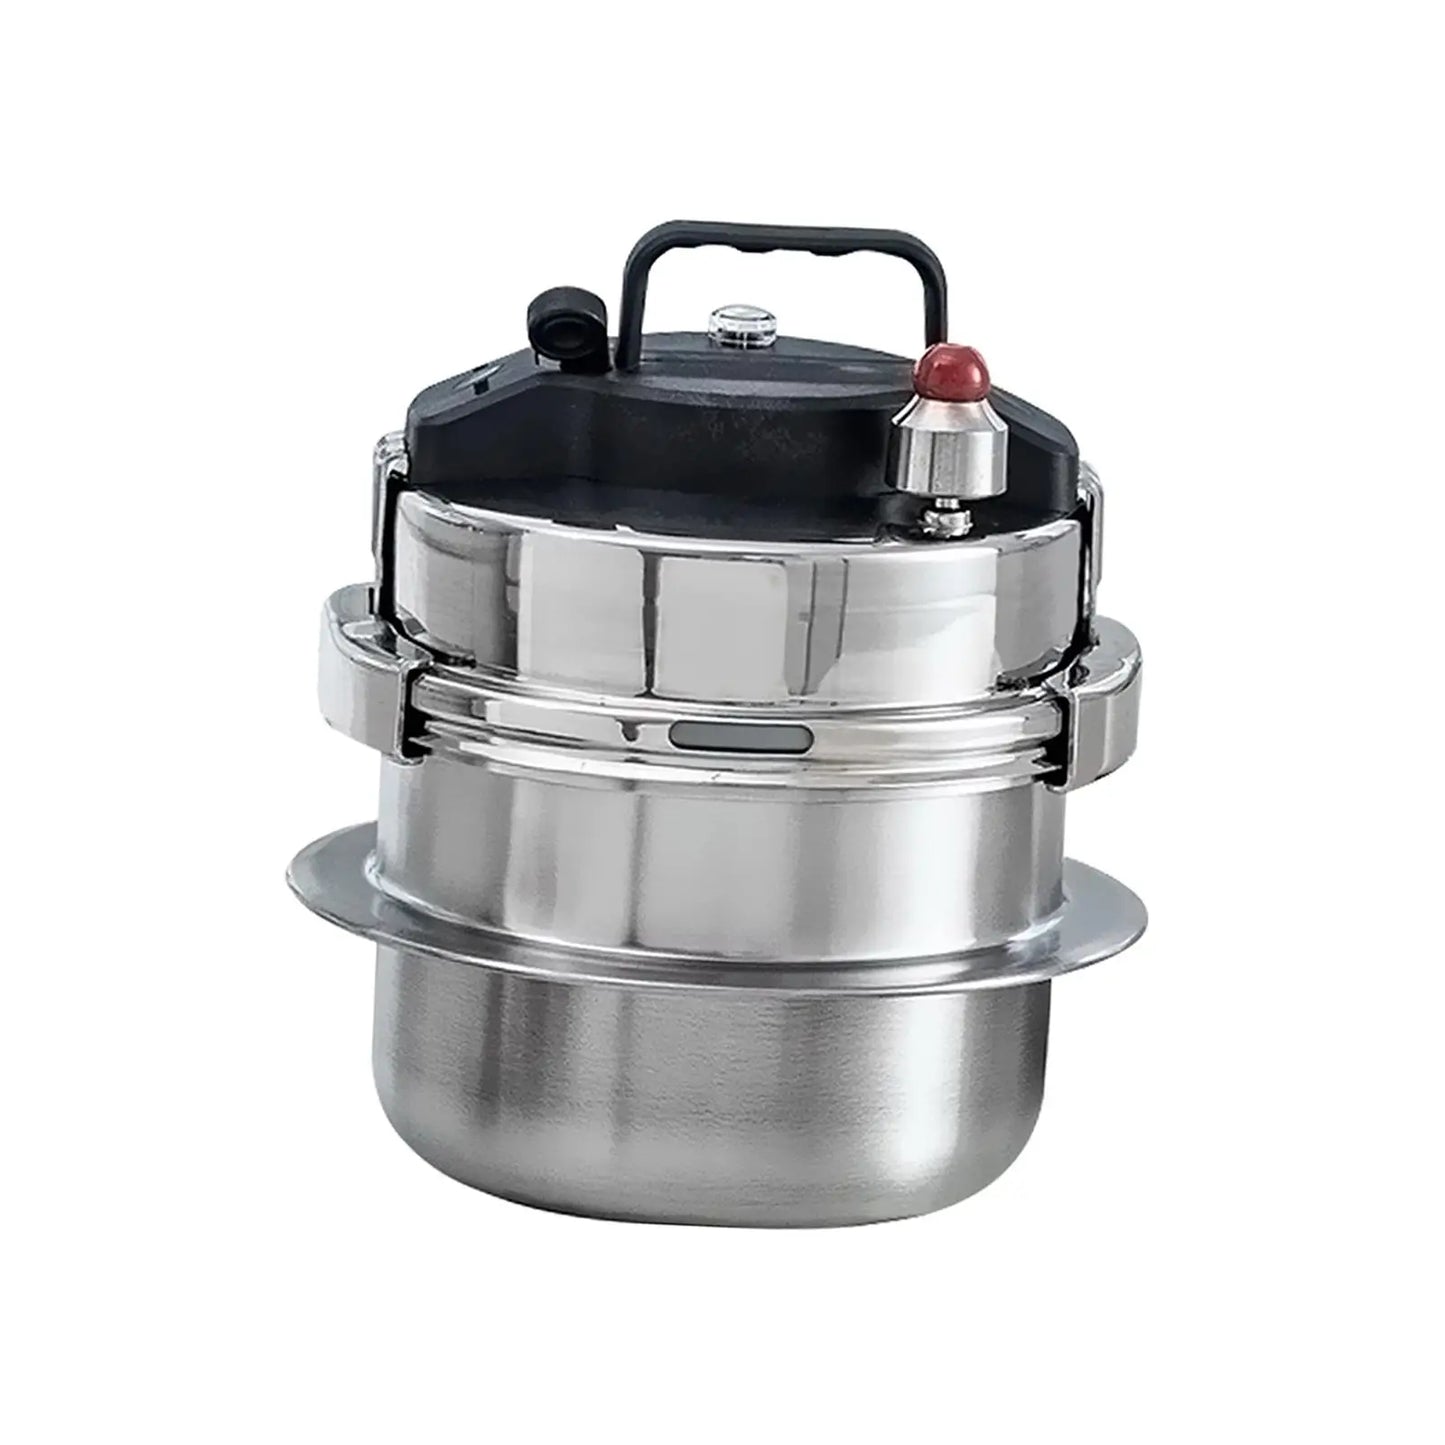 Pressure Cooker 2L with Secure Knob for All Stove Top